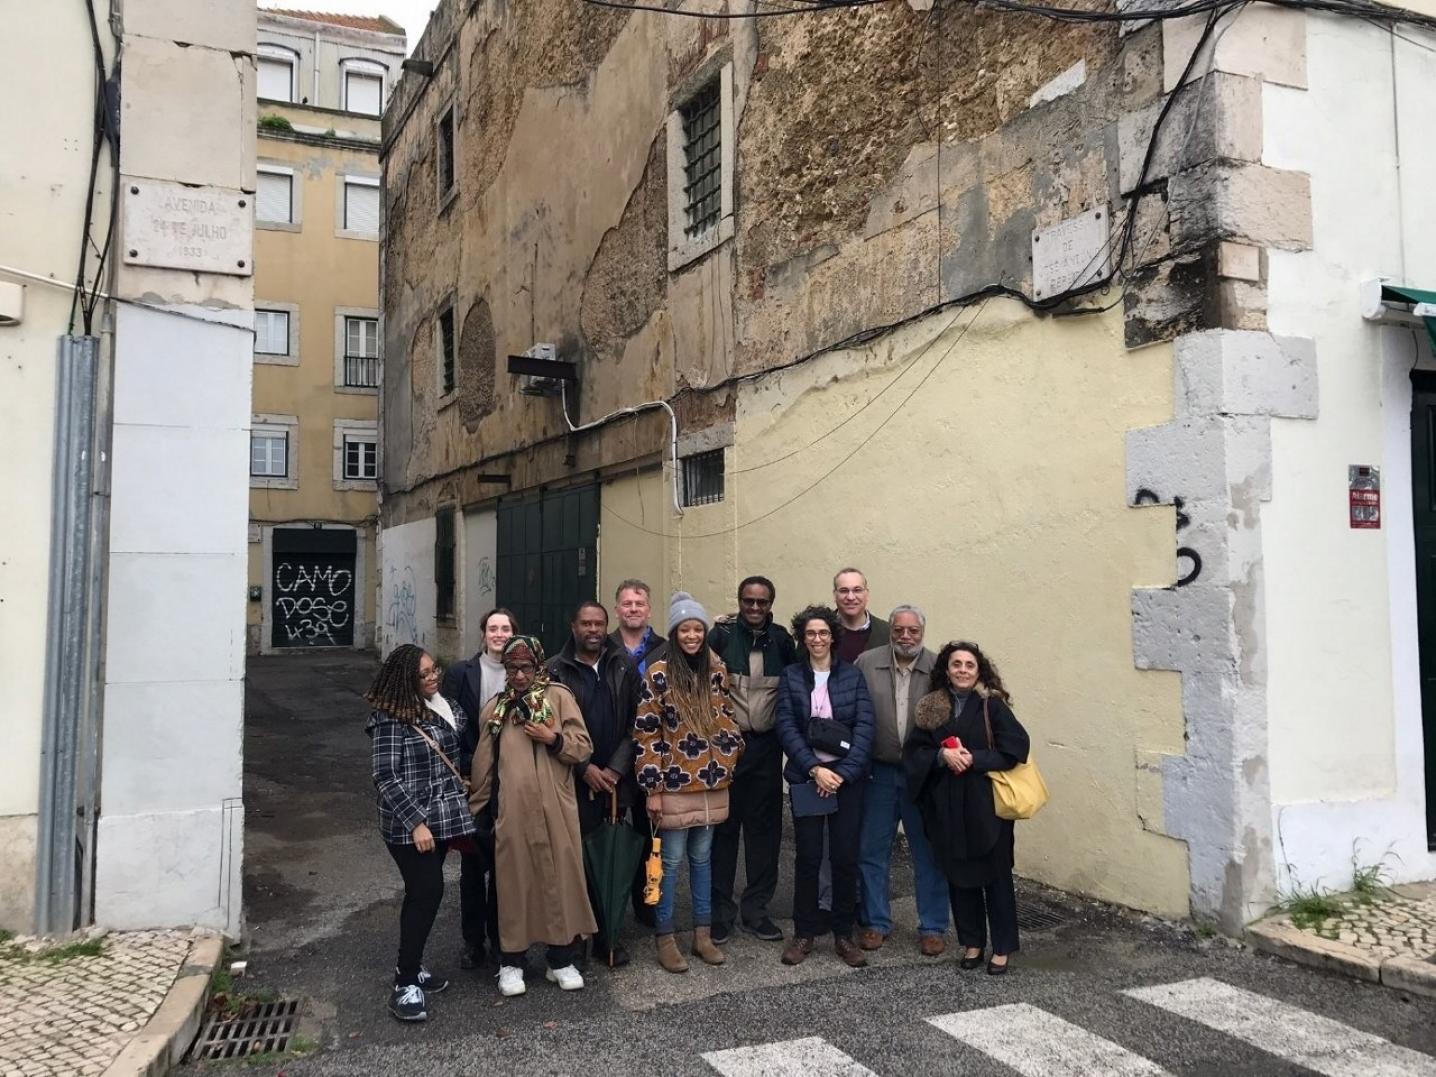 Group of people standing in a street in Lisbon, Portugal